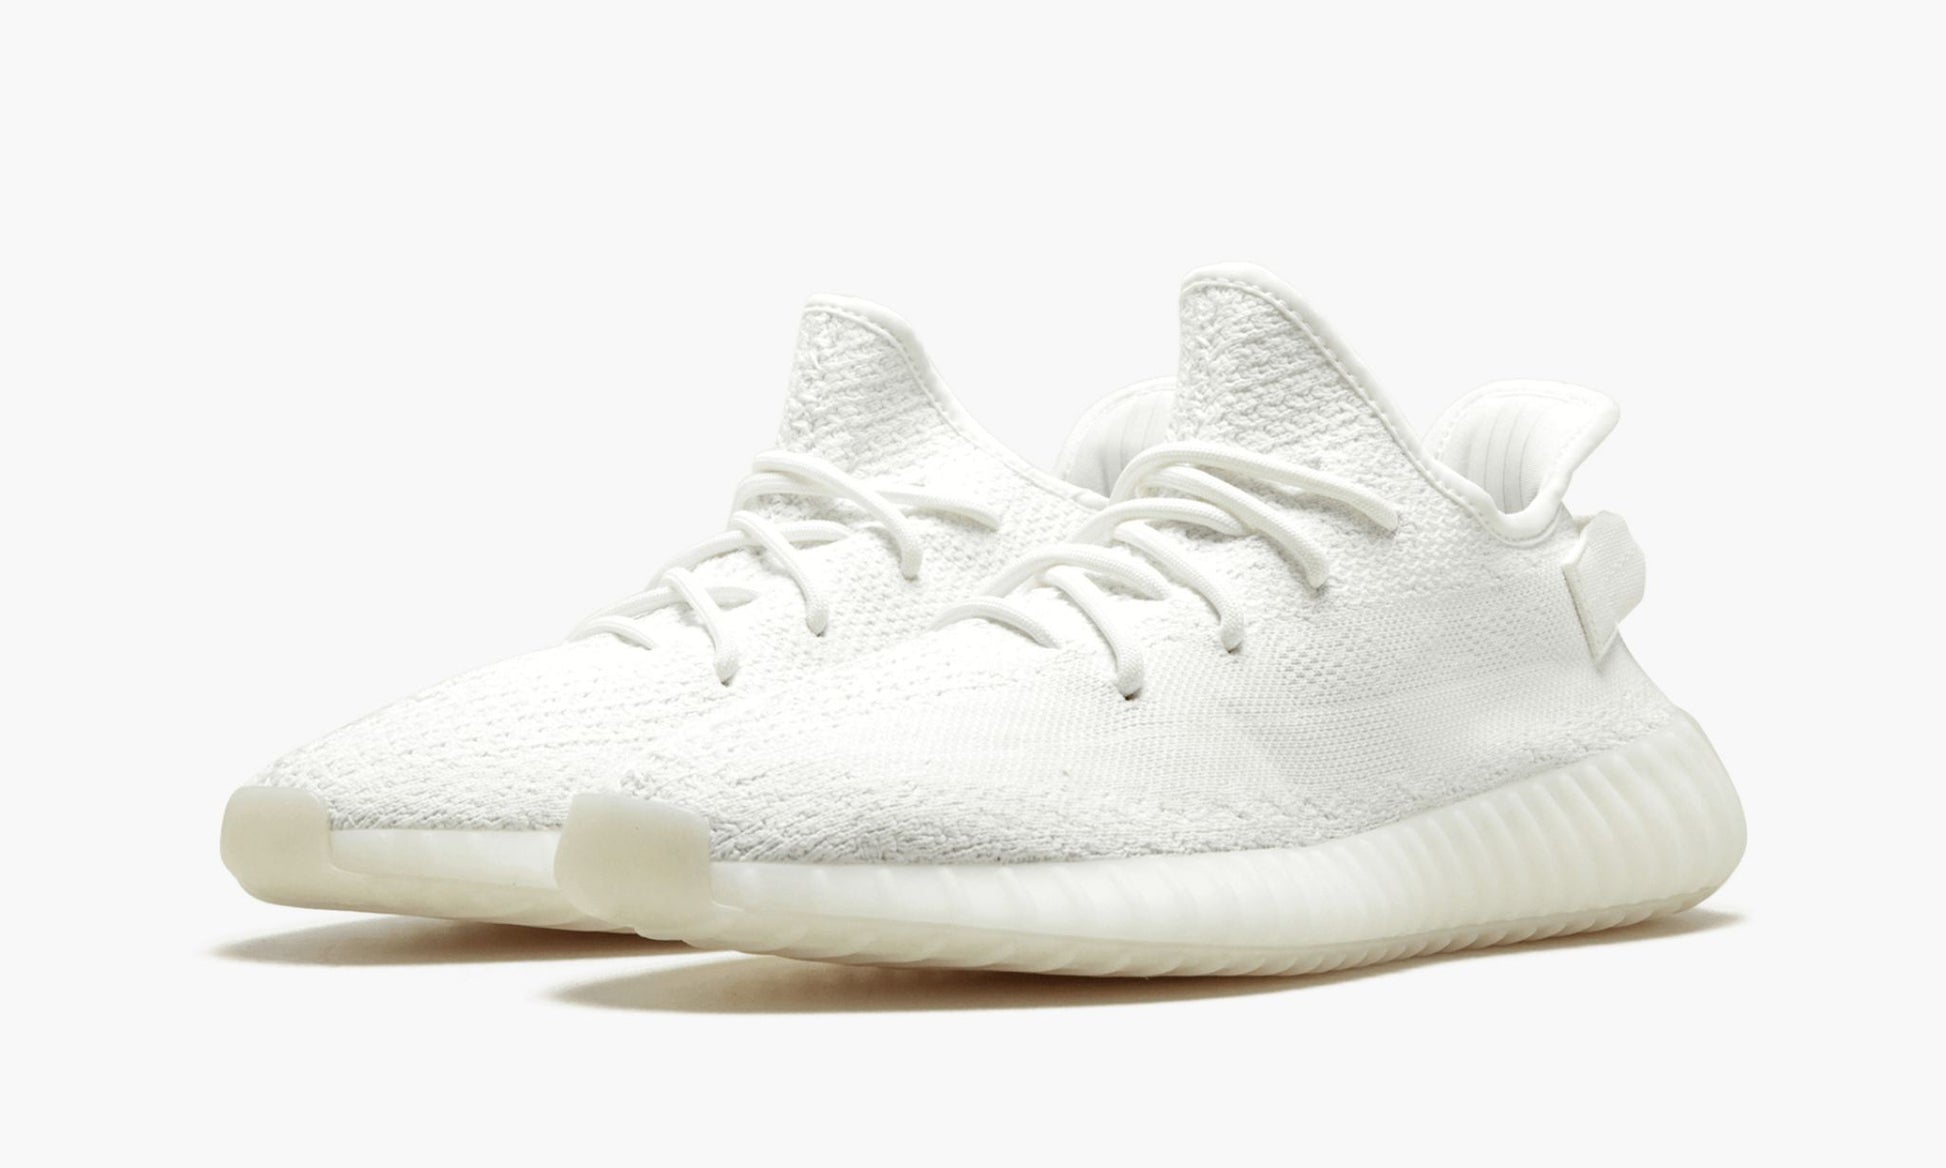 Concurso Río Paraná Sinis Adidas Yeezy Boost 350 V2 Cream/Triple White - CP9366 - Archive Sneakers